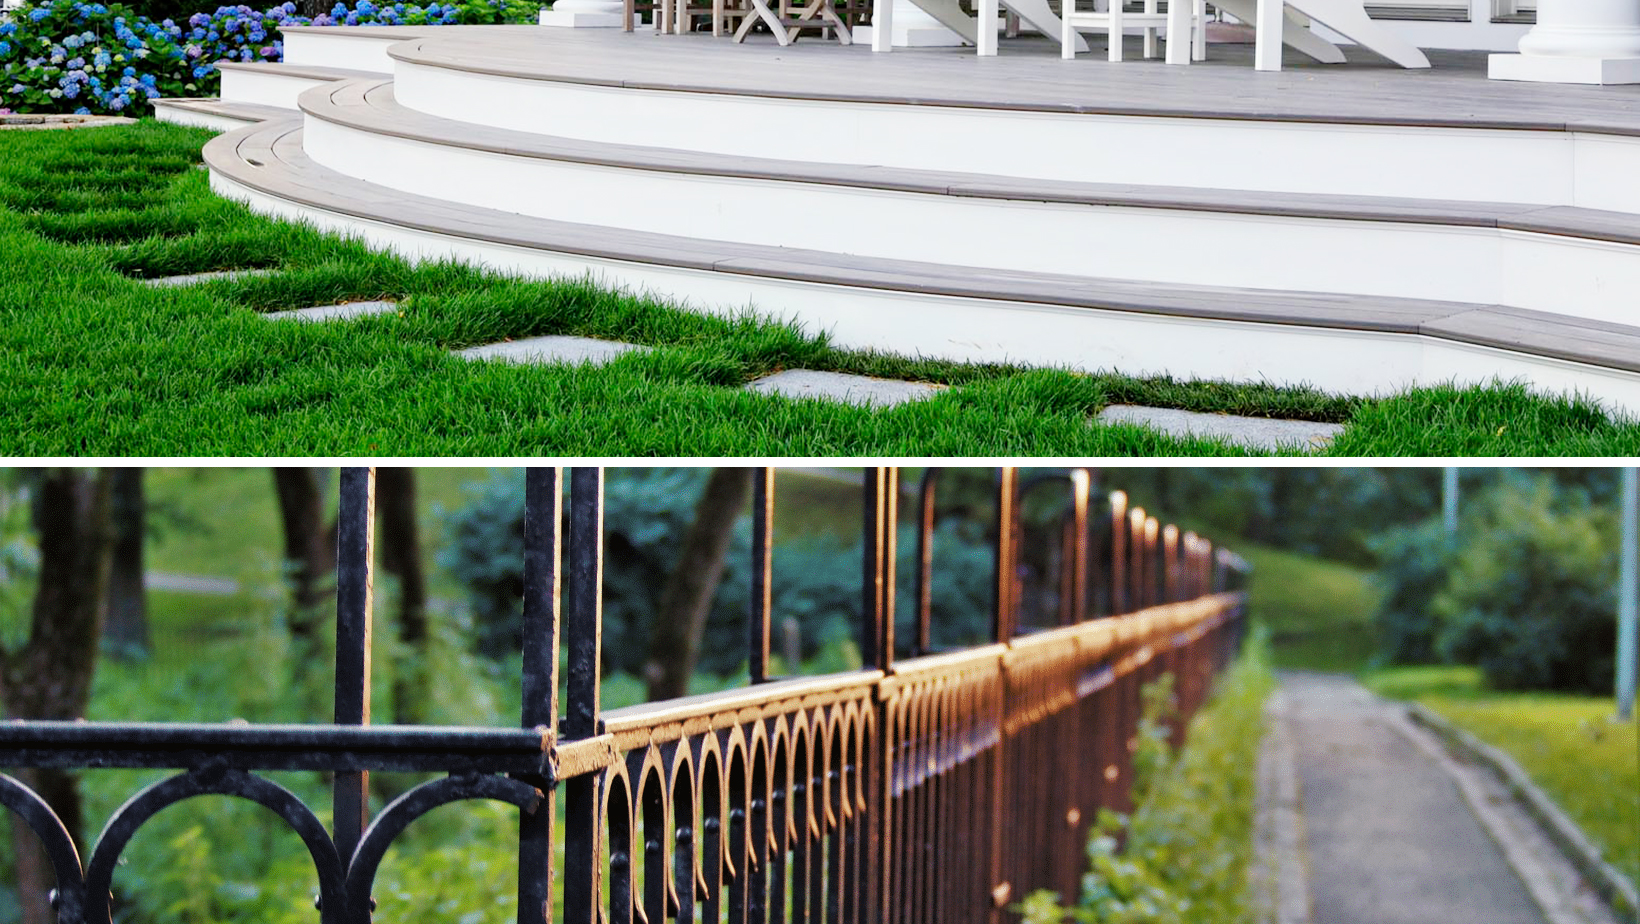 A split image showing a new deck alongside an aluminum fence that looks like wrought iron to illustrate the concept of aluminum vs wood fencing.